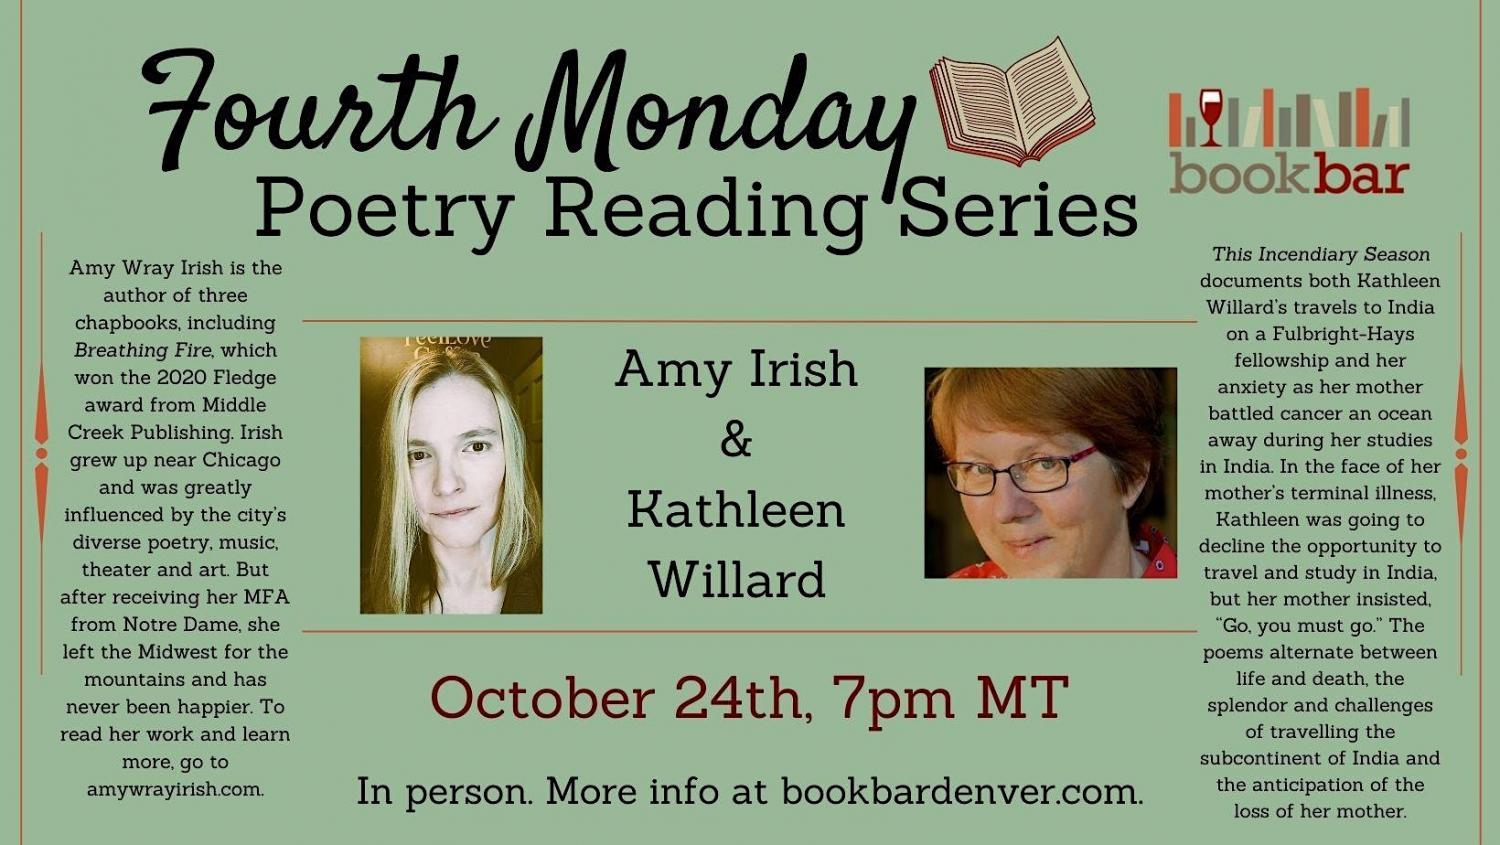 Fourth Monday Poetry Reading
Mon Oct 24, 7:00 PM - Mon Oct 24, 7:00 PM
in 4 days